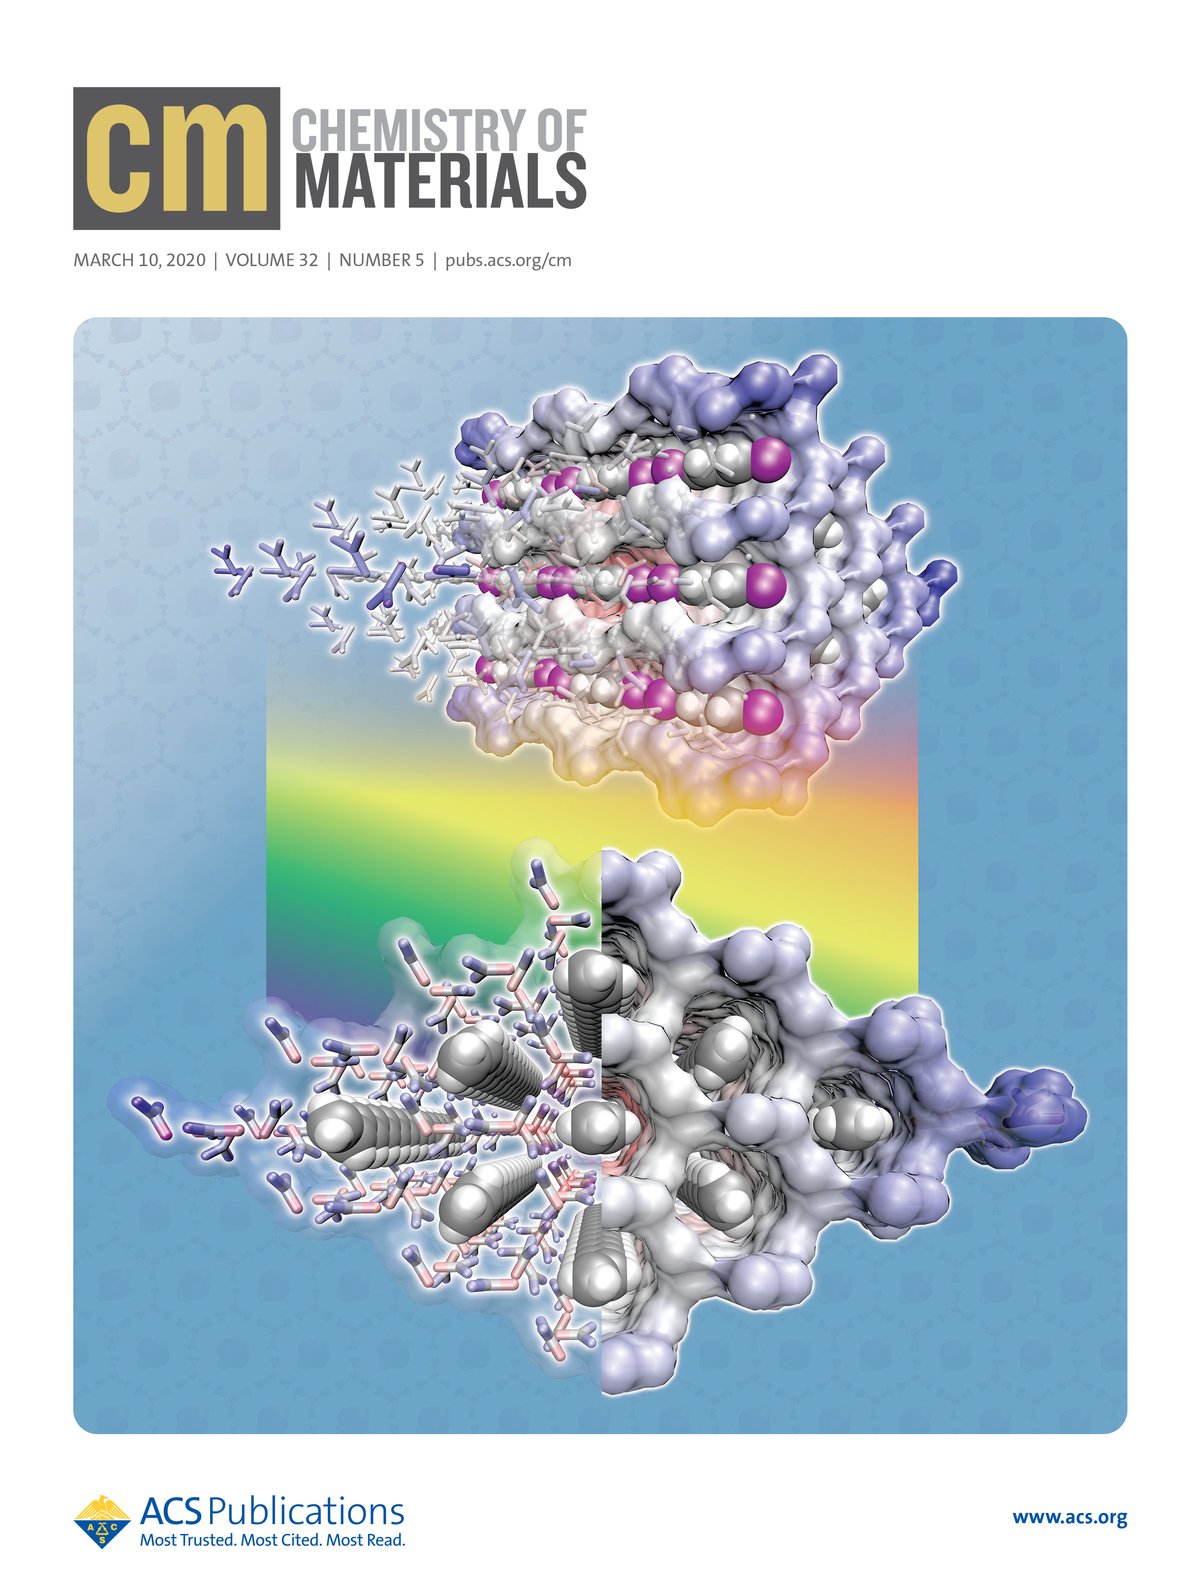 March 2020 issue of Chemistry of Materials.